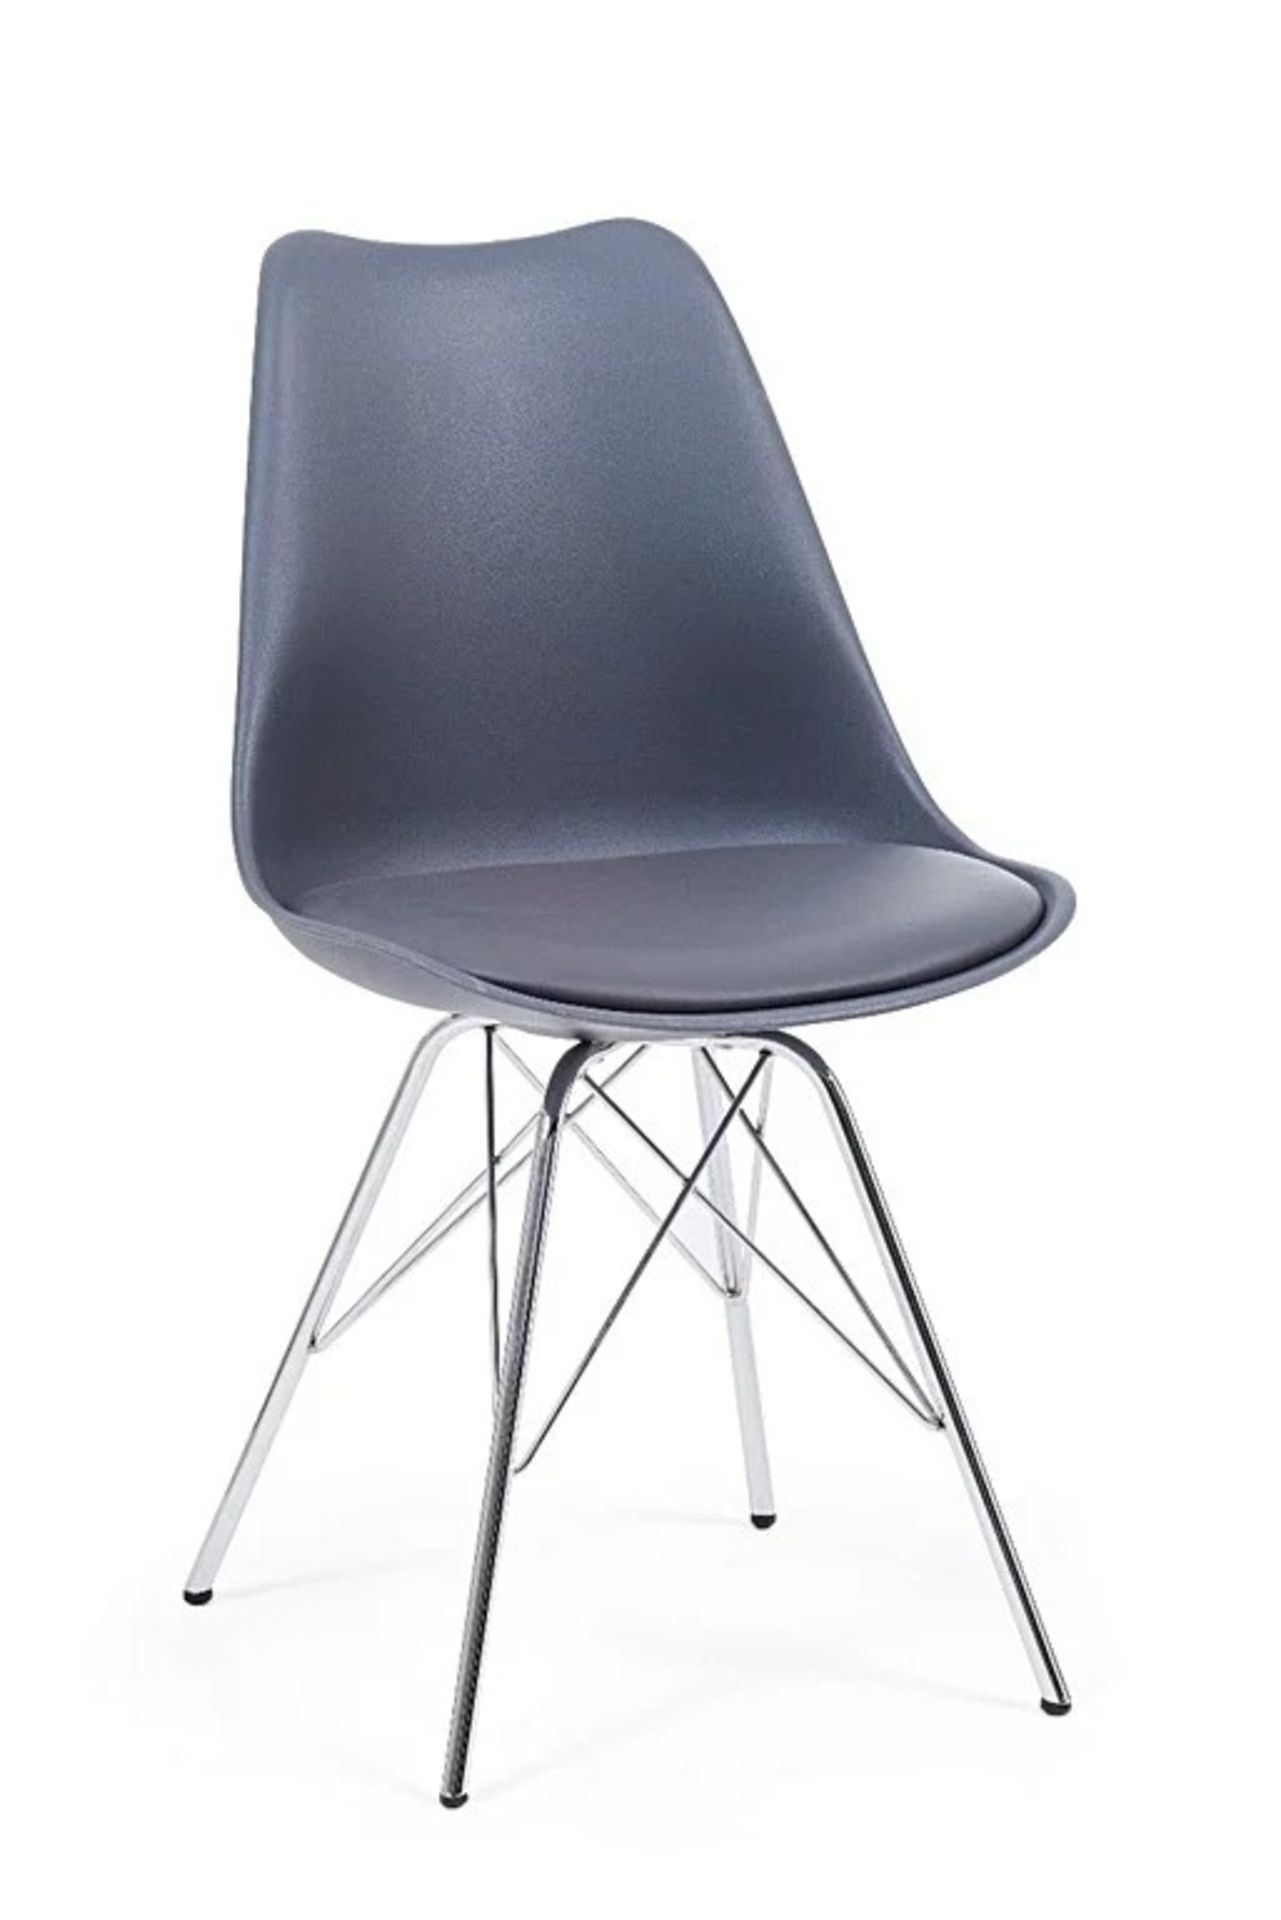 A set of 4 x Celine Dark Grey Dining Chair In pure retro style, the Celine chairs feature rich